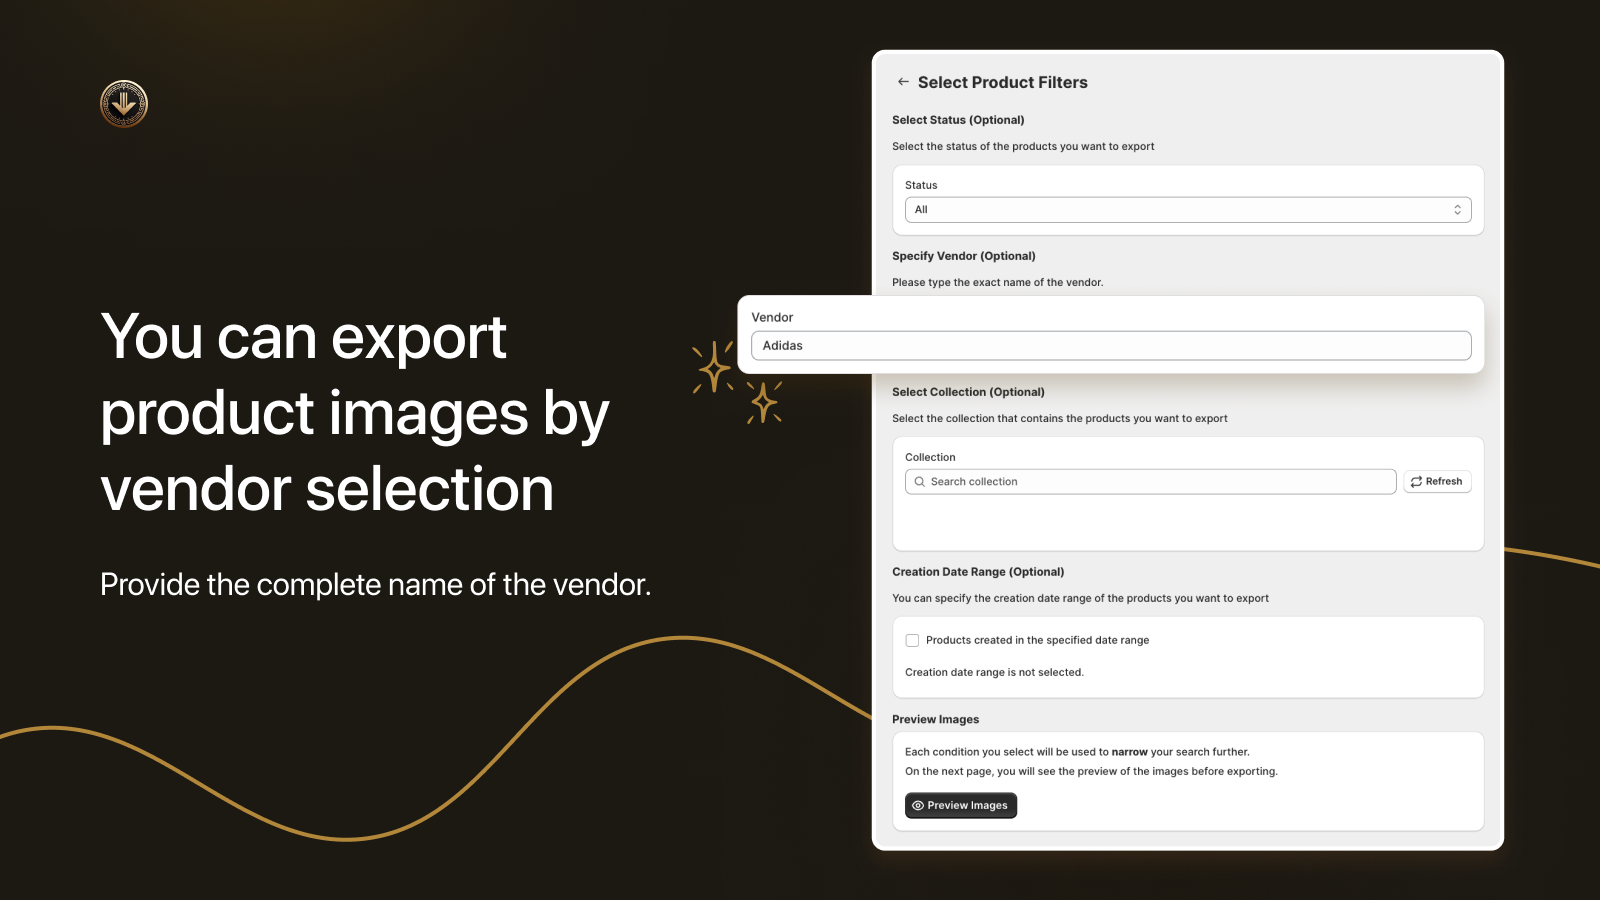 You can export product images by vendor selection